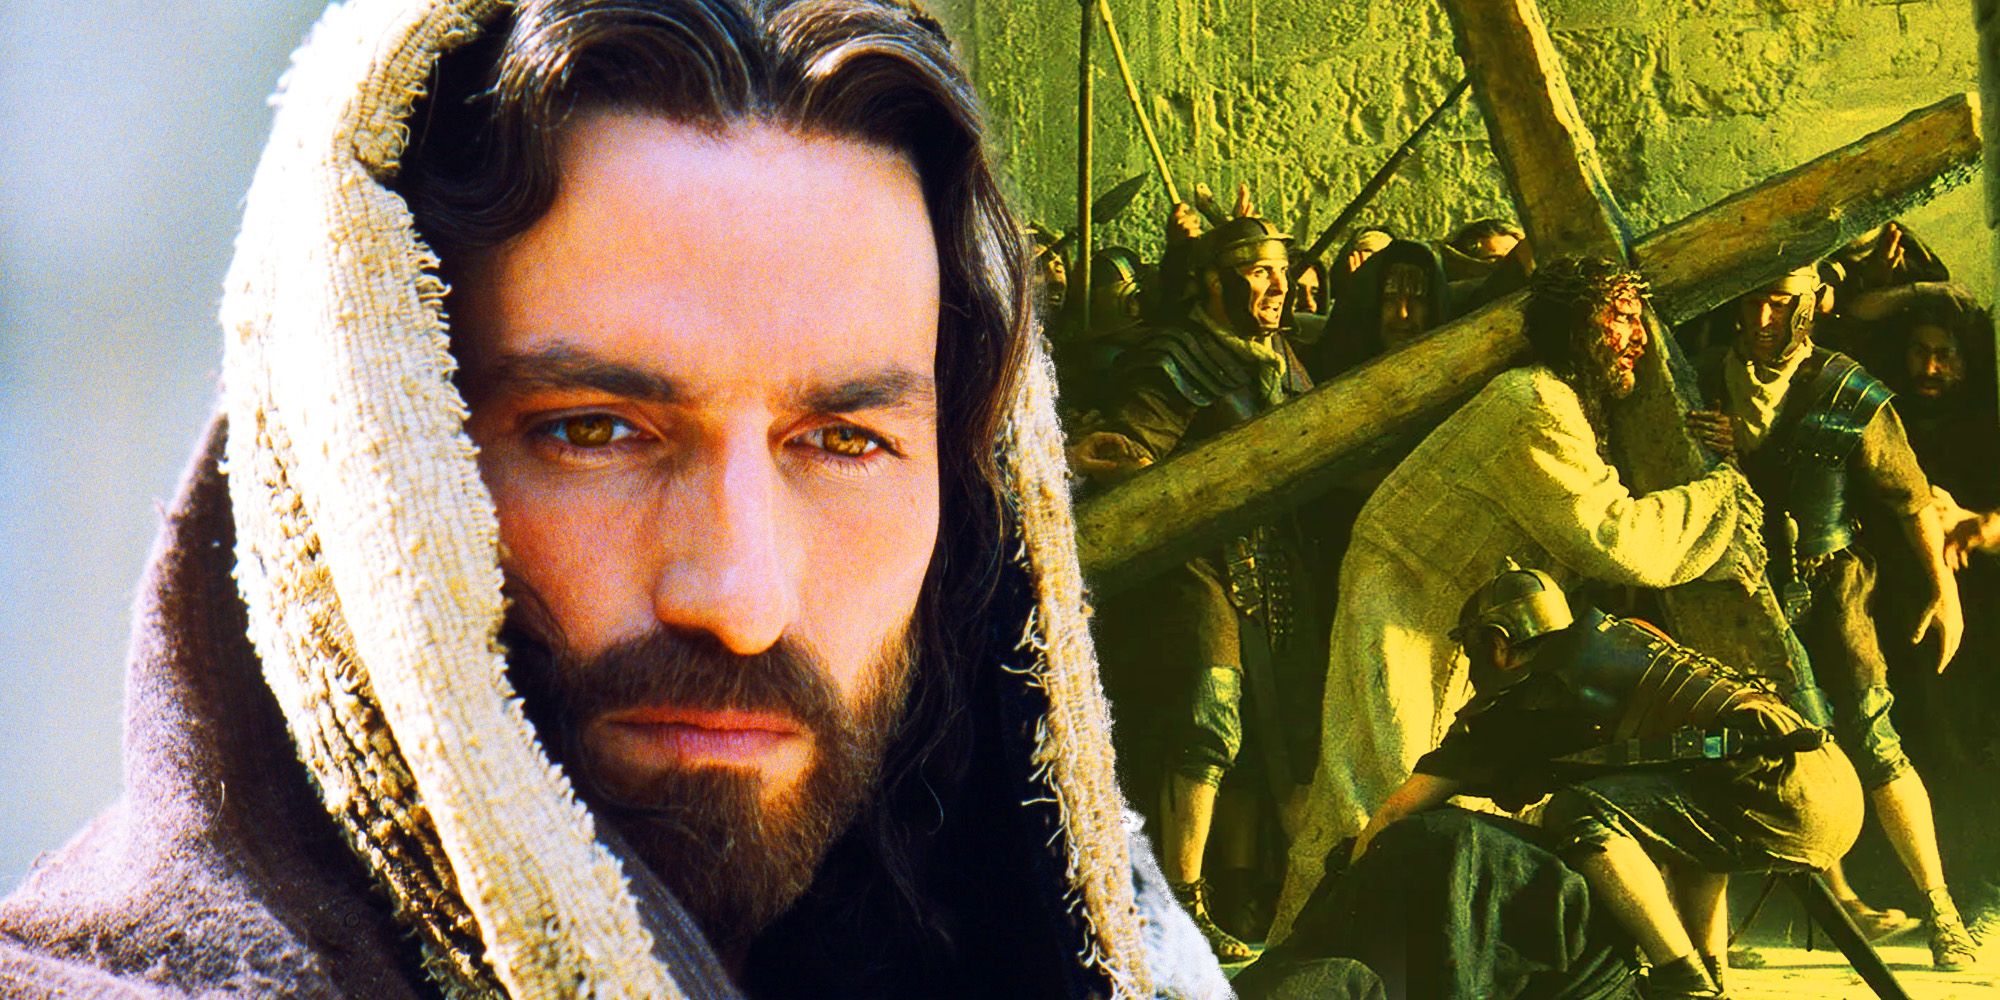 passion-of-the-christ-movies-controversies-explained